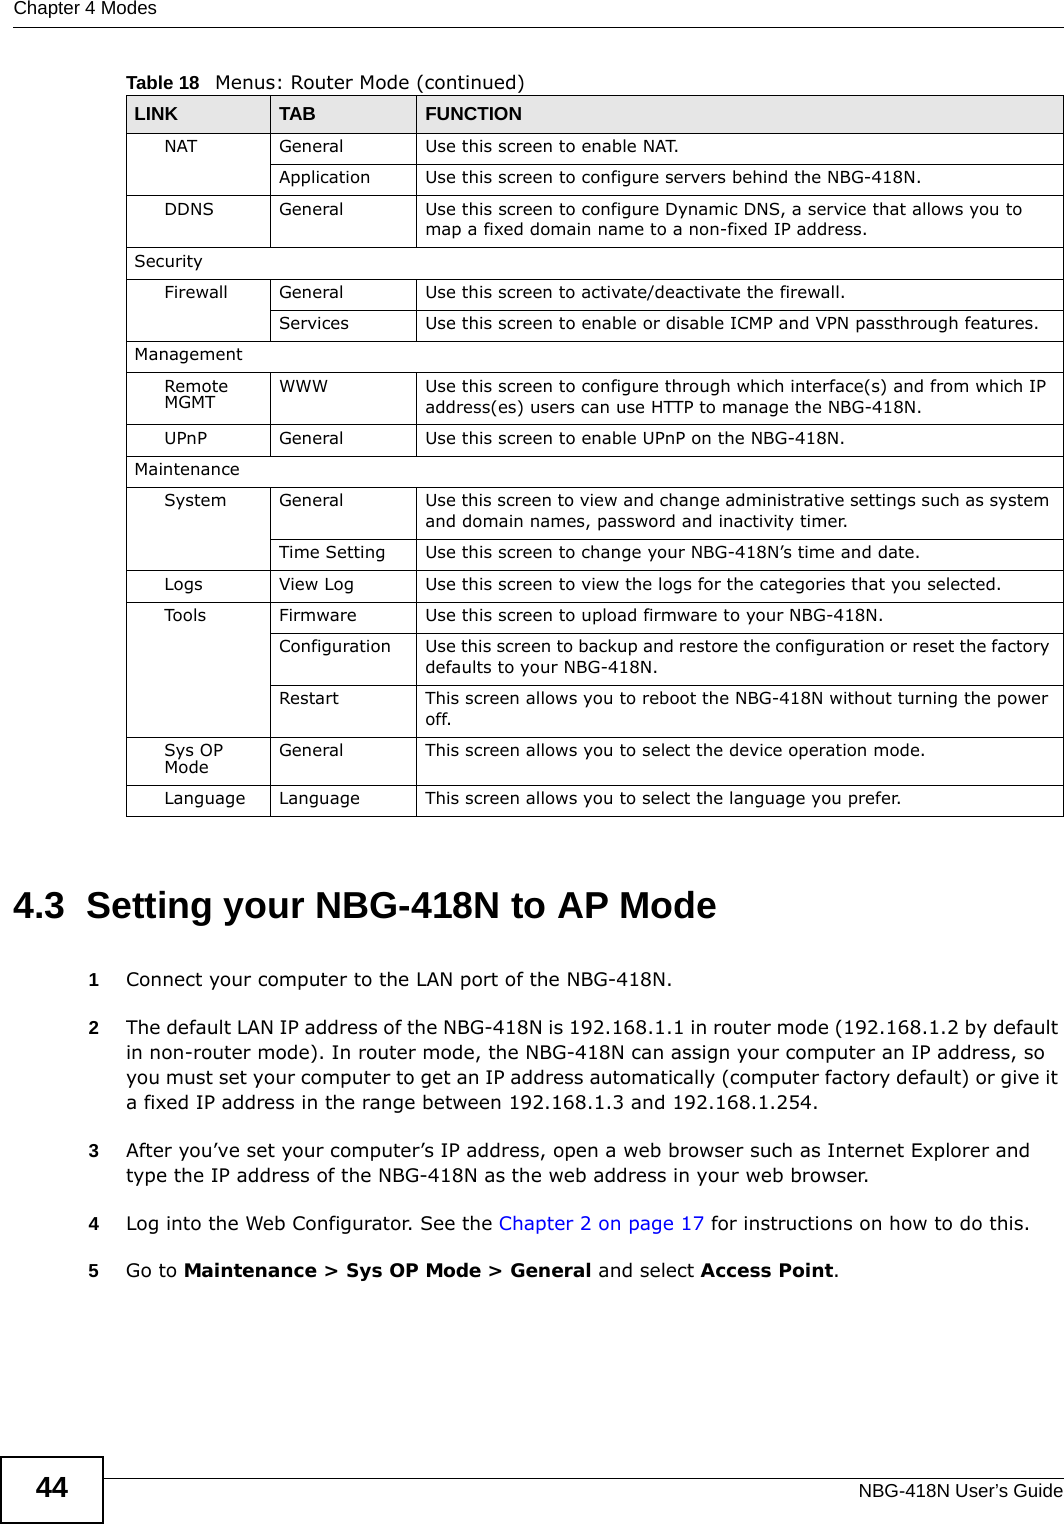 Chapter 4 ModesNBG-418N User’s Guide444.3  Setting your NBG-418N to AP Mode1Connect your computer to the LAN port of the NBG-418N. 2The default LAN IP address of the NBG-418N is 192.168.1.1 in router mode (192.168.1.2 by default in non-router mode). In router mode, the NBG-418N can assign your computer an IP address, so you must set your computer to get an IP address automatically (computer factory default) or give it a fixed IP address in the range between 192.168.1.3 and 192.168.1.254.3After you’ve set your computer’s IP address, open a web browser such as Internet Explorer and type the IP address of the NBG-418N as the web address in your web browser.4Log into the Web Configurator. See the Chapter 2 on page 17 for instructions on how to do this.5Go to Maintenance &gt; Sys OP Mode &gt; General and select Access Point.NAT General Use this screen to enable NAT.Application Use this screen to configure servers behind the NBG-418N.DDNS General Use this screen to configure Dynamic DNS, a service that allows you to map a fixed domain name to a non-fixed IP address.SecurityFirewall General Use this screen to activate/deactivate the firewall.Services Use this screen to enable or disable ICMP and VPN passthrough features.ManagementRemote MGMT WWW Use this screen to configure through which interface(s) and from which IP address(es) users can use HTTP to manage the NBG-418N.UPnP General Use this screen to enable UPnP on the NBG-418N. MaintenanceSystem General Use this screen to view and change administrative settings such as system and domain names, password and inactivity timer.Time Setting Use this screen to change your NBG-418N’s time and date.Logs View Log Use this screen to view the logs for the categories that you selected.Tools Firmware Use this screen to upload firmware to your NBG-418N.Configuration Use this screen to backup and restore the configuration or reset the factory defaults to your NBG-418N. Restart This screen allows you to reboot the NBG-418N without turning the power off.Sys OP Mode General This screen allows you to select the device operation mode.Language Language This screen allows you to select the language you prefer.Table 18   Menus: Router Mode (continued)LINK TAB FUNCTION